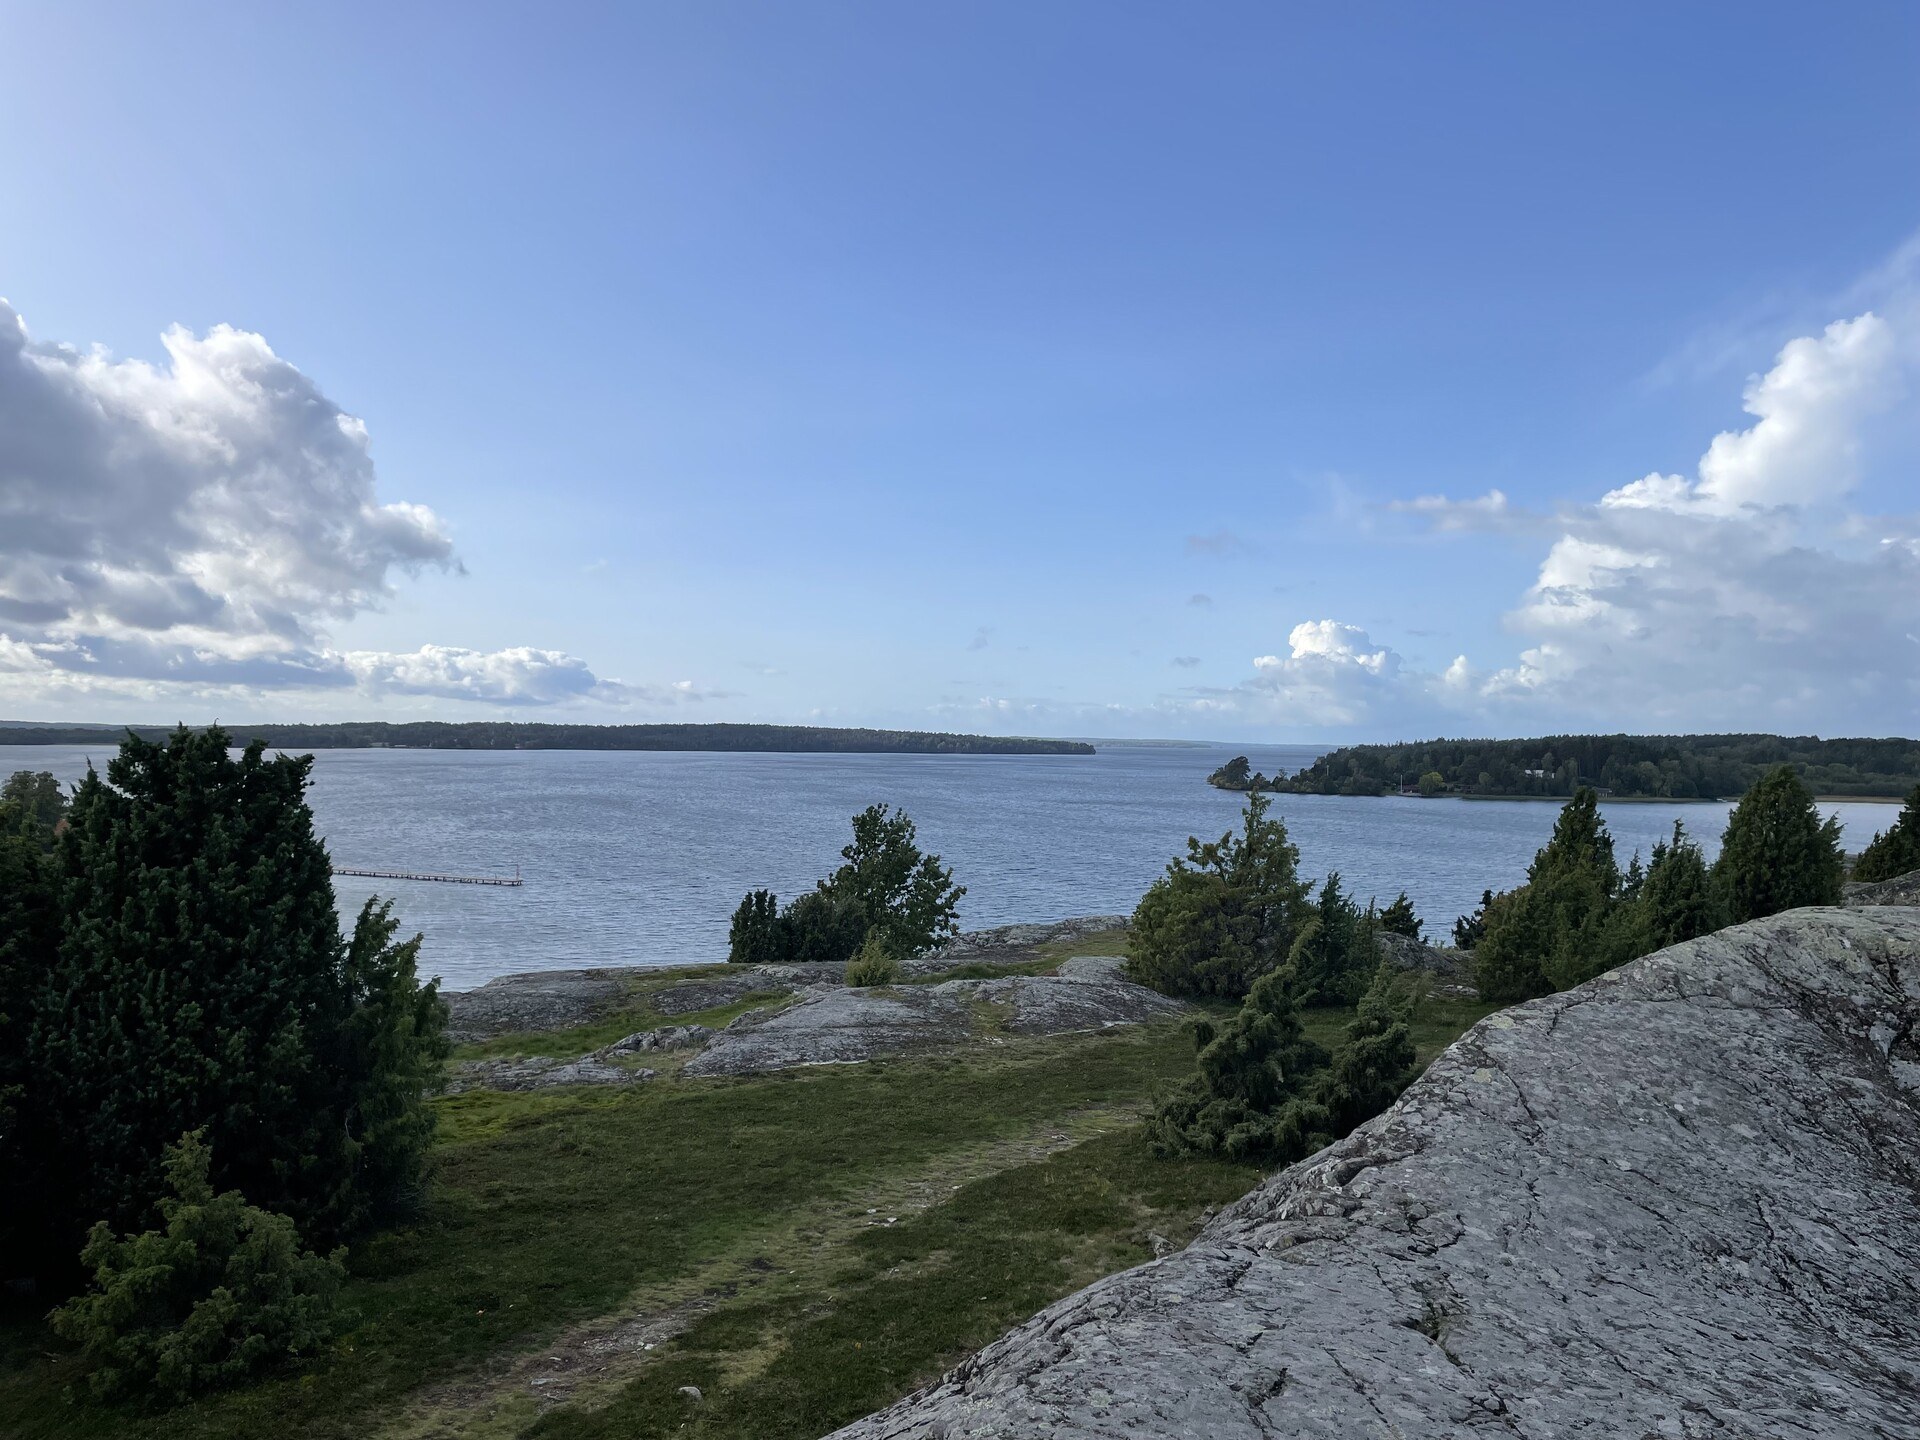 A vista of Mälaren from the top of the hill on Björkö, with some islands off in the distance